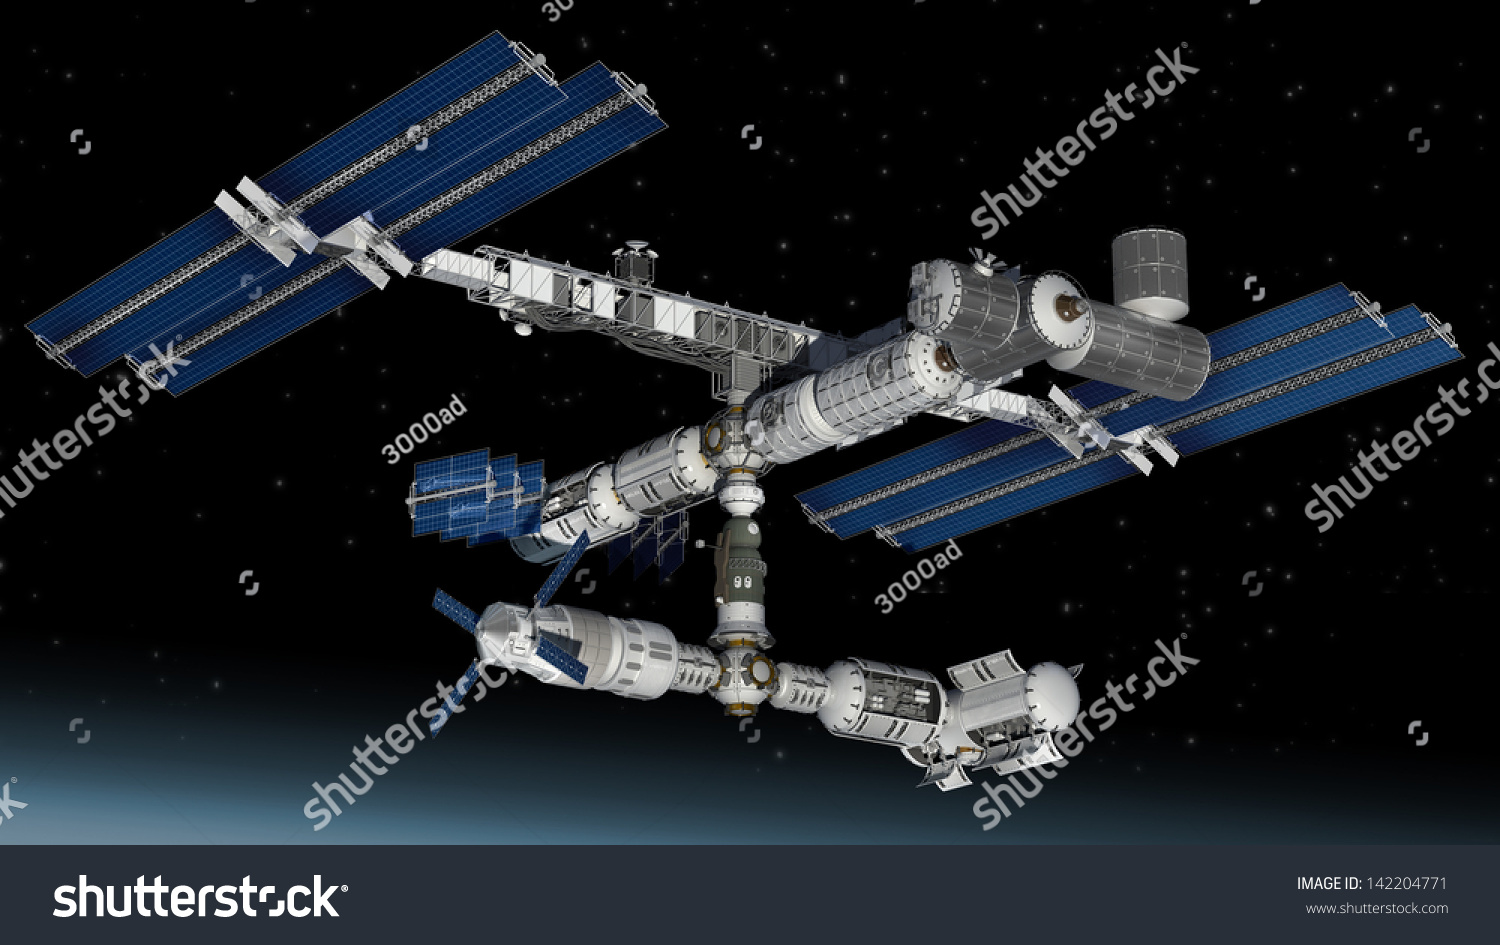 Satellite Space station flying over Earth with reflective solar panels and a modular interchangeable structure. #142204771